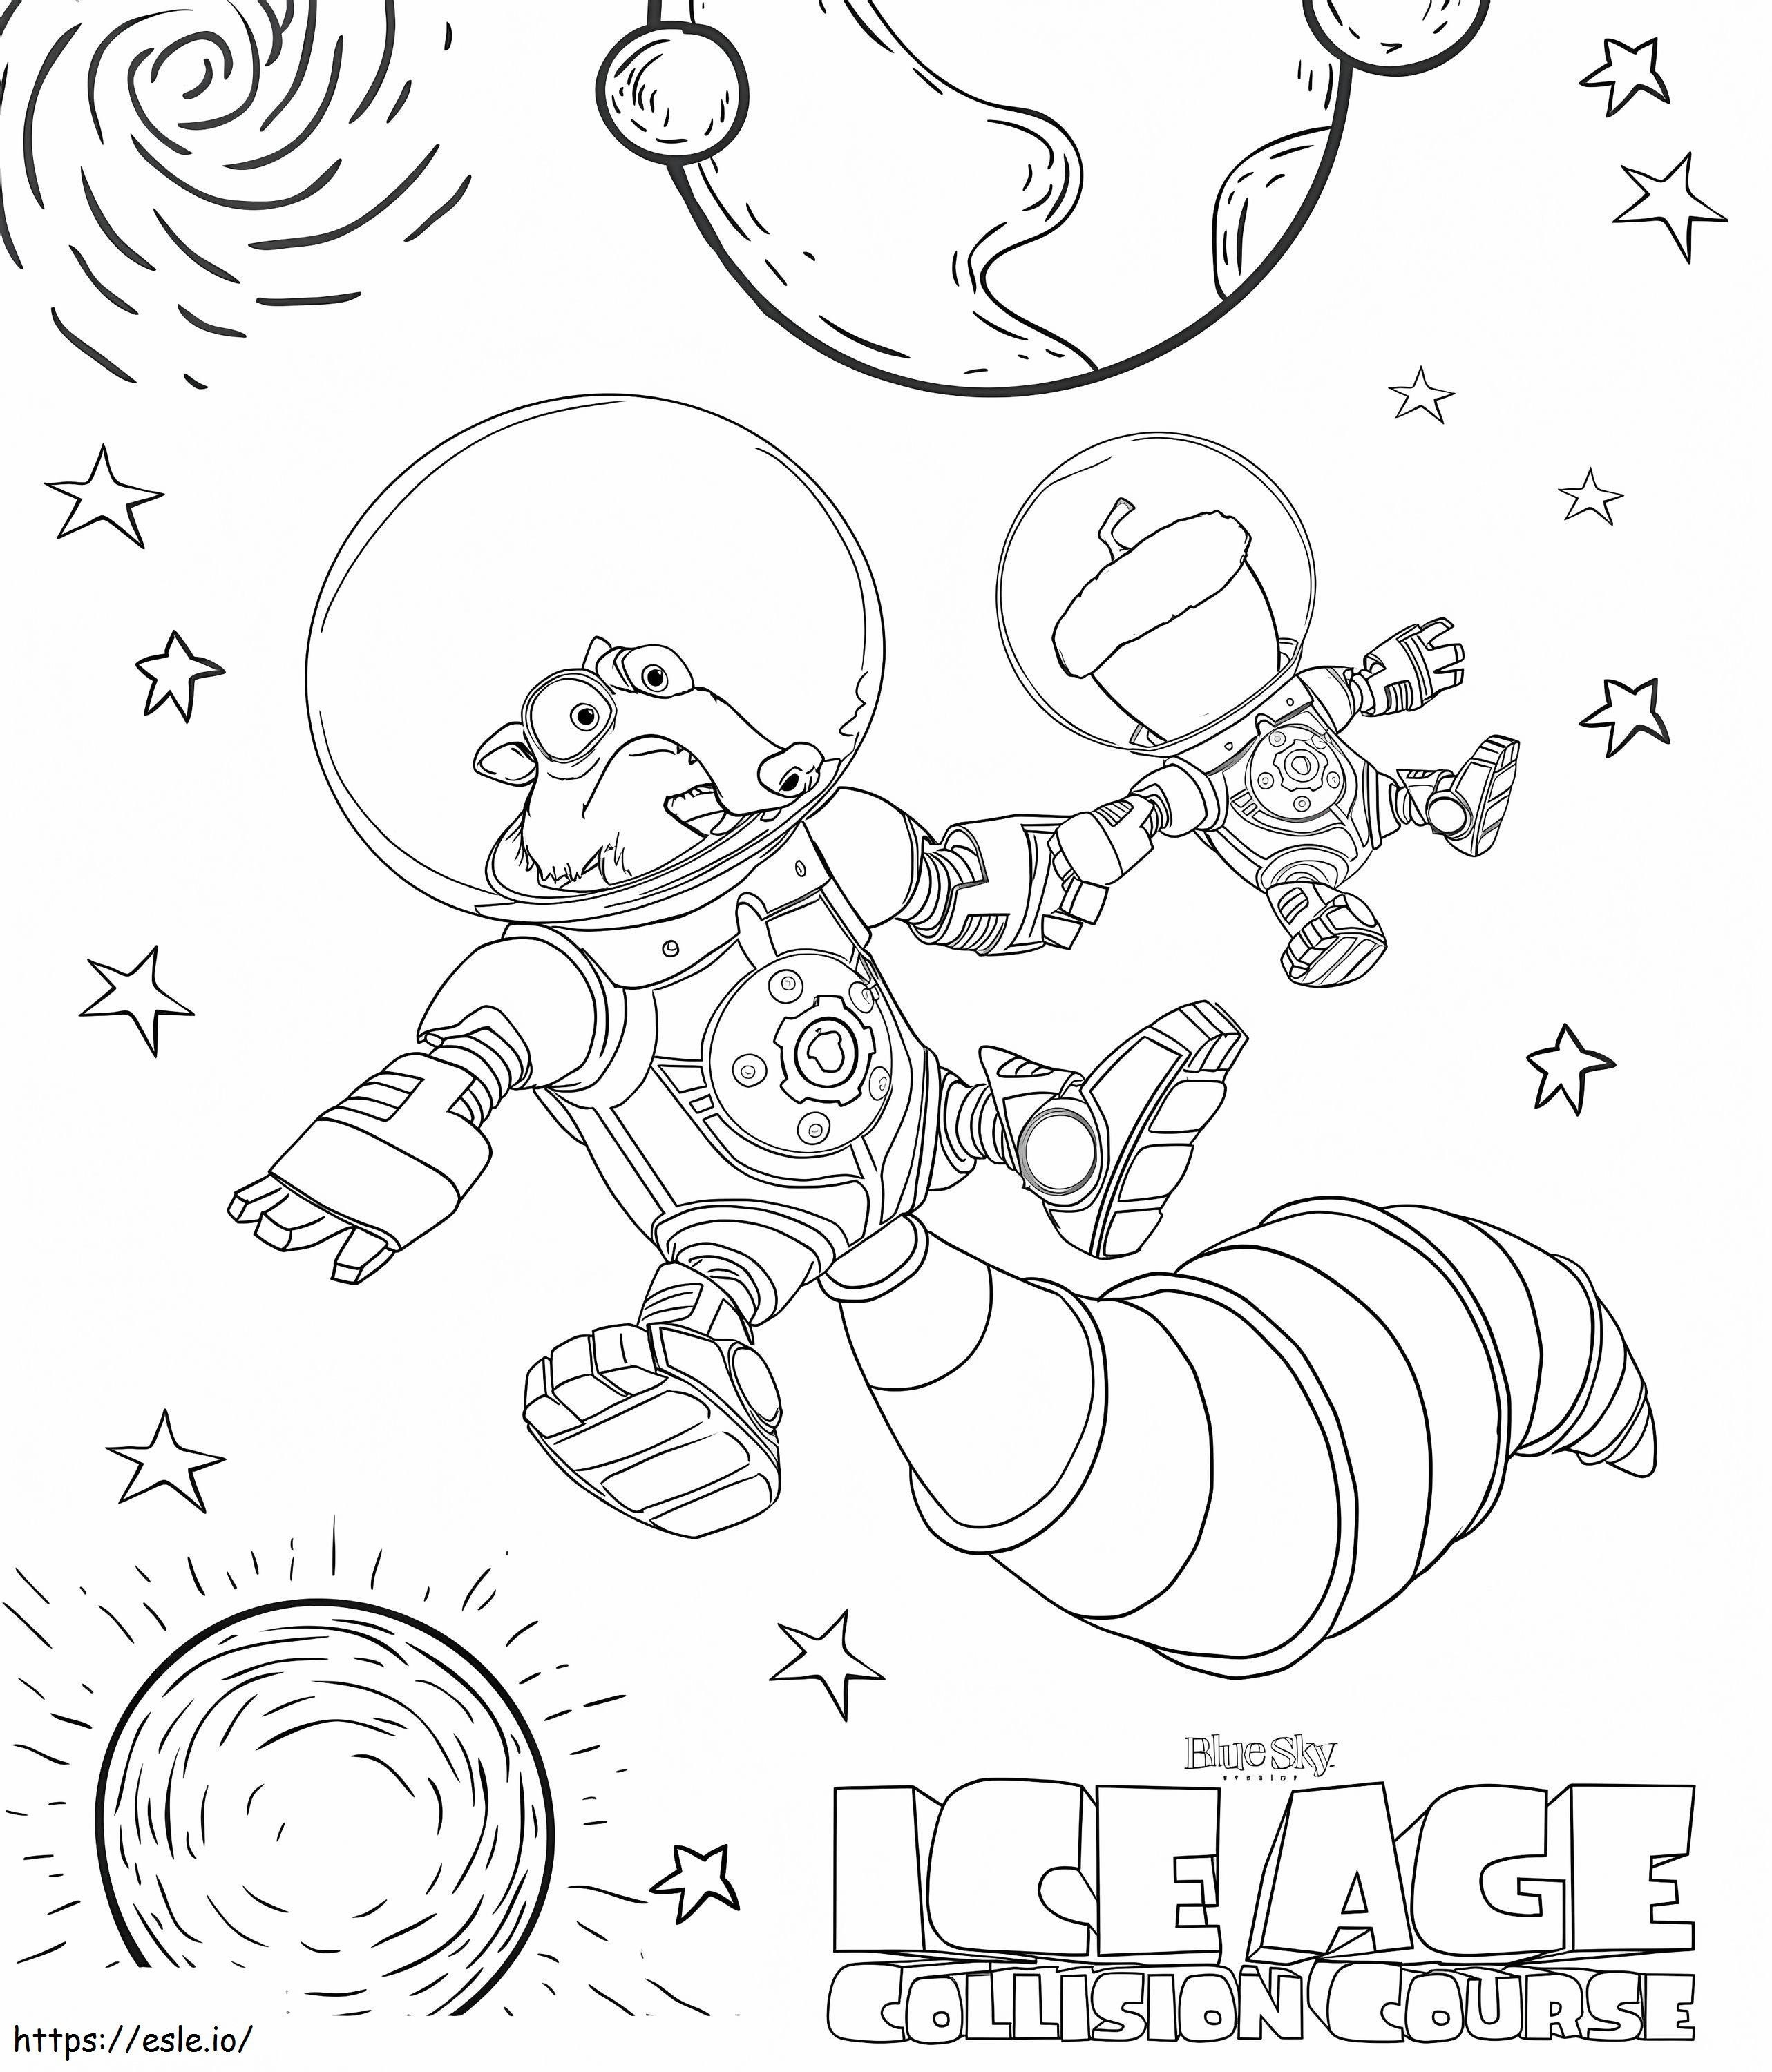 Scrat In Space coloring page